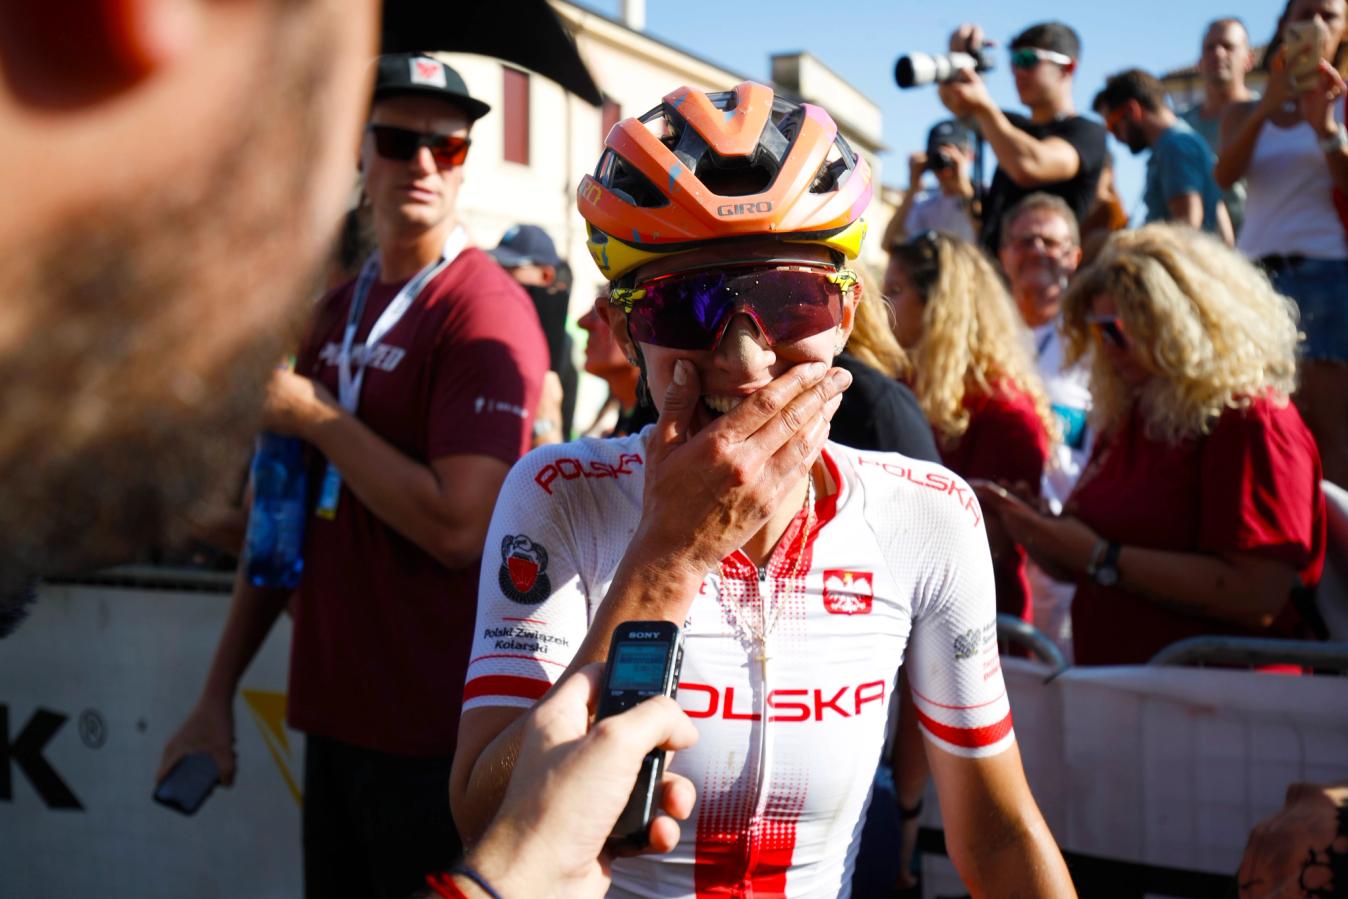 Newly-crowned world champ Kasia Niewiadoma tells GCN about her ride as the emotion flows out